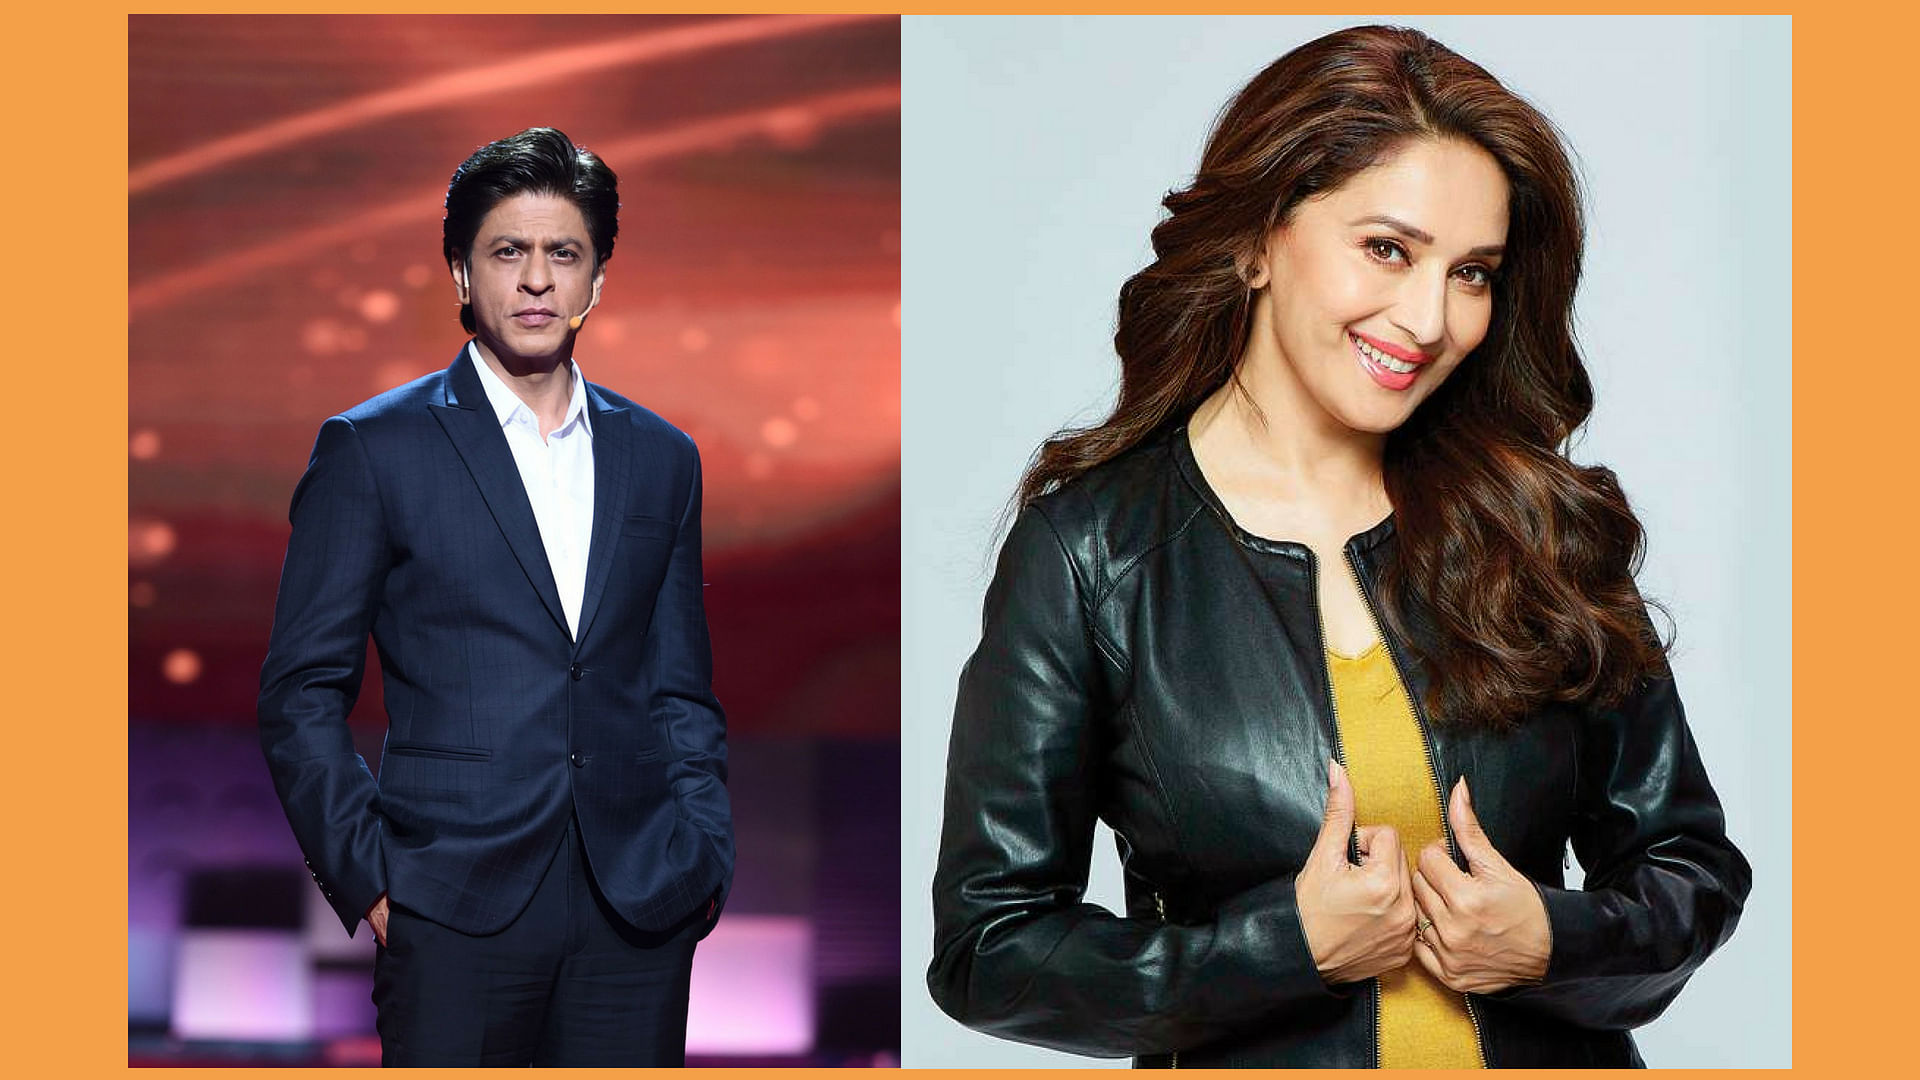 Shah Rukh Khan and Madhuri Dixit are now members of the Academy of Motion Picture Arts and Sciences.